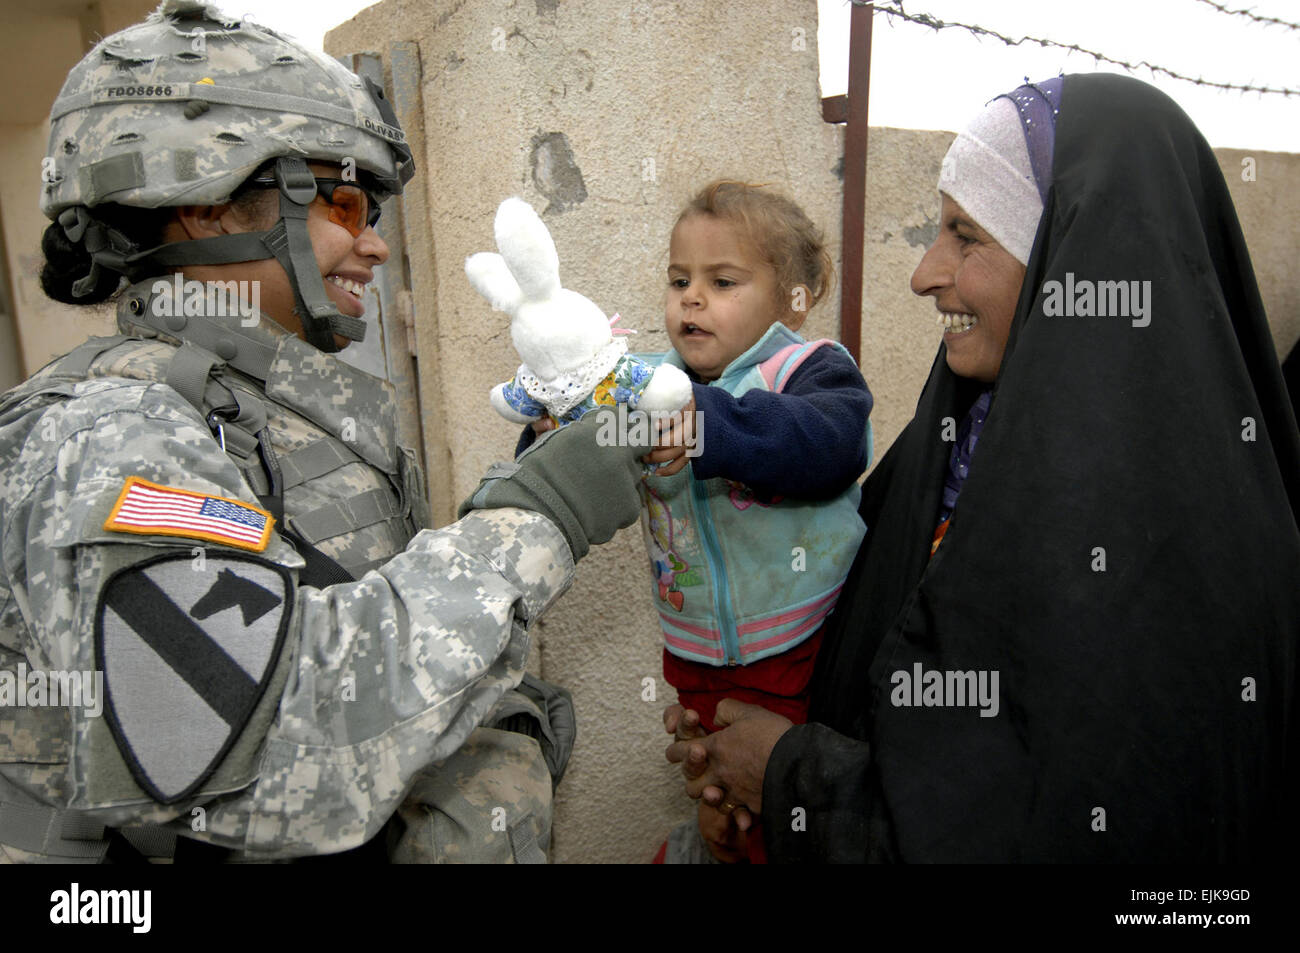 U.S. Army Spc. Deidre Olivas hands an Iraqi child waiting for medical treatment a stuffed animal during a combined medical mission in Quadria, Iraq, Dec. 7, 2007. Olivas is from Forward Support Troop, 1st Squadron, 7th Cavalry Regiment.  Tech. Sgt. William Greer Stock Photo